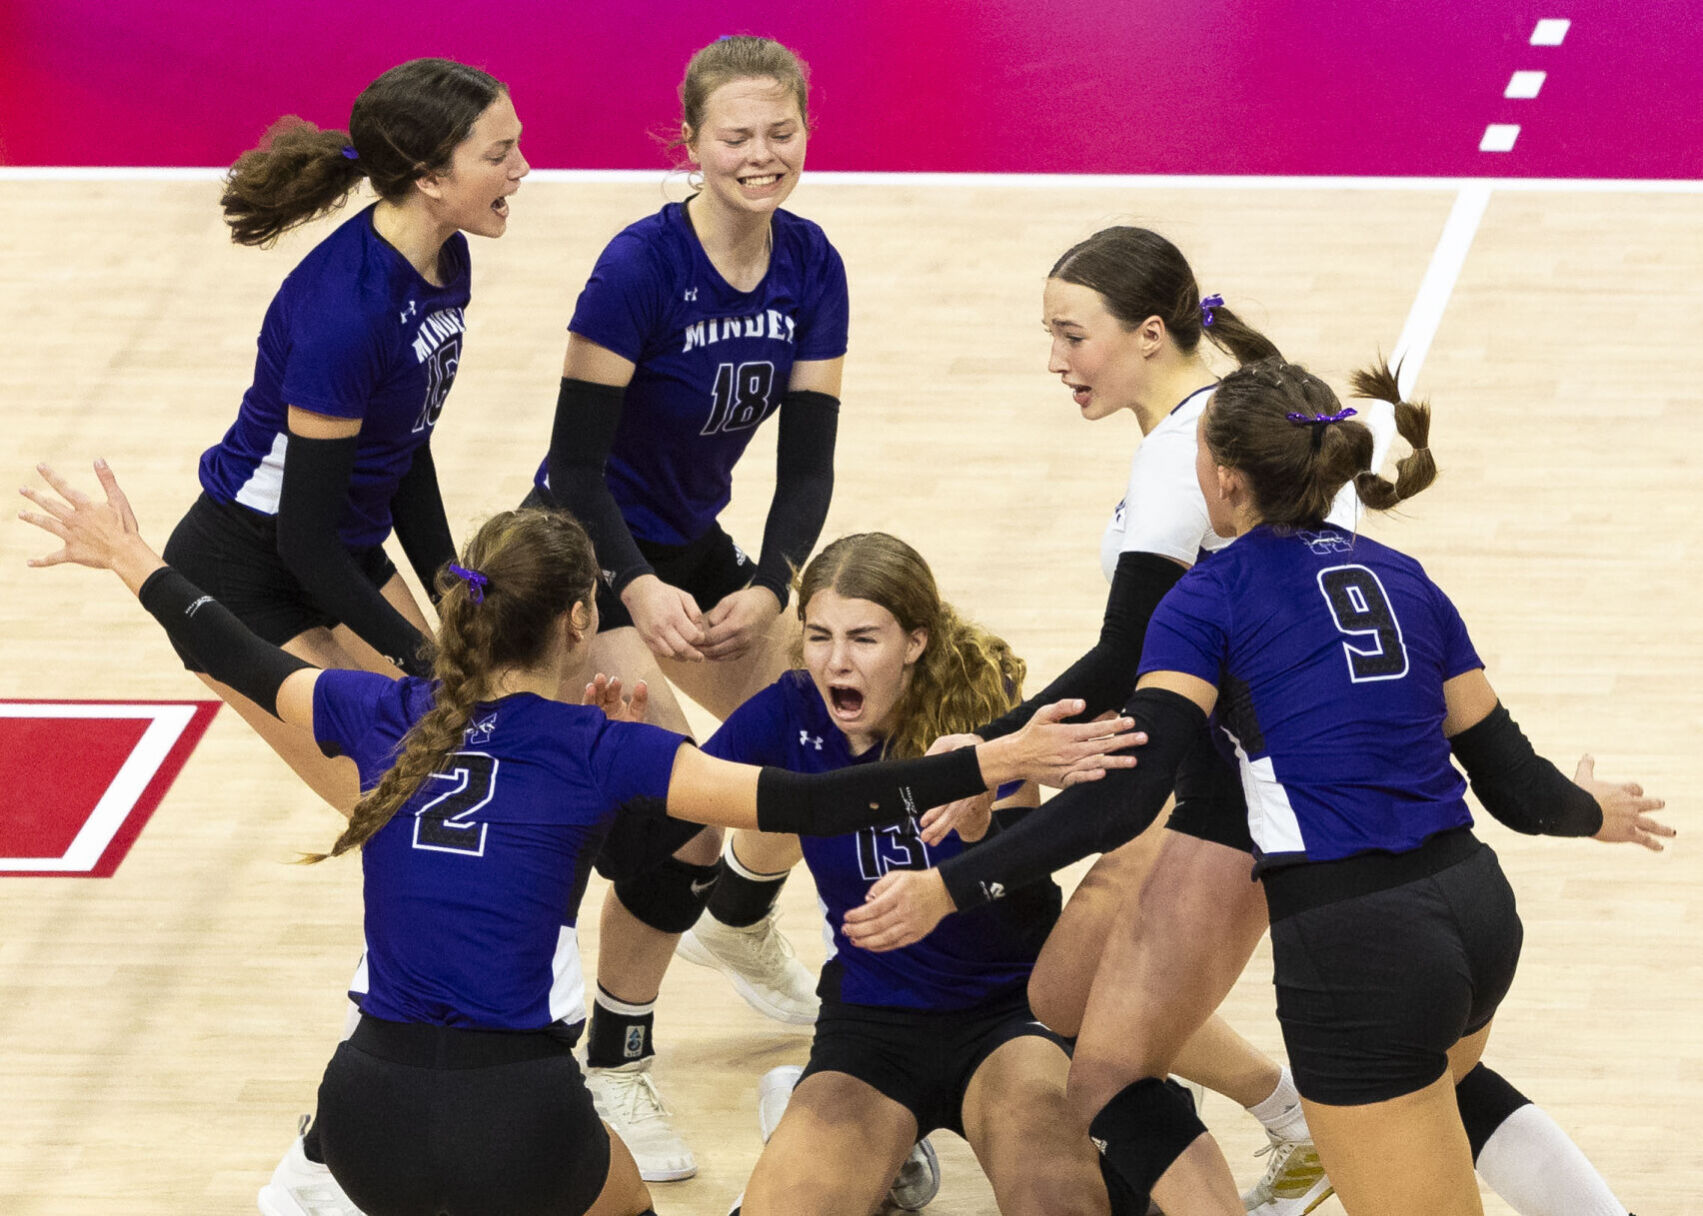 Minden’s Incredible Victory: Wins State Title in Five Sets